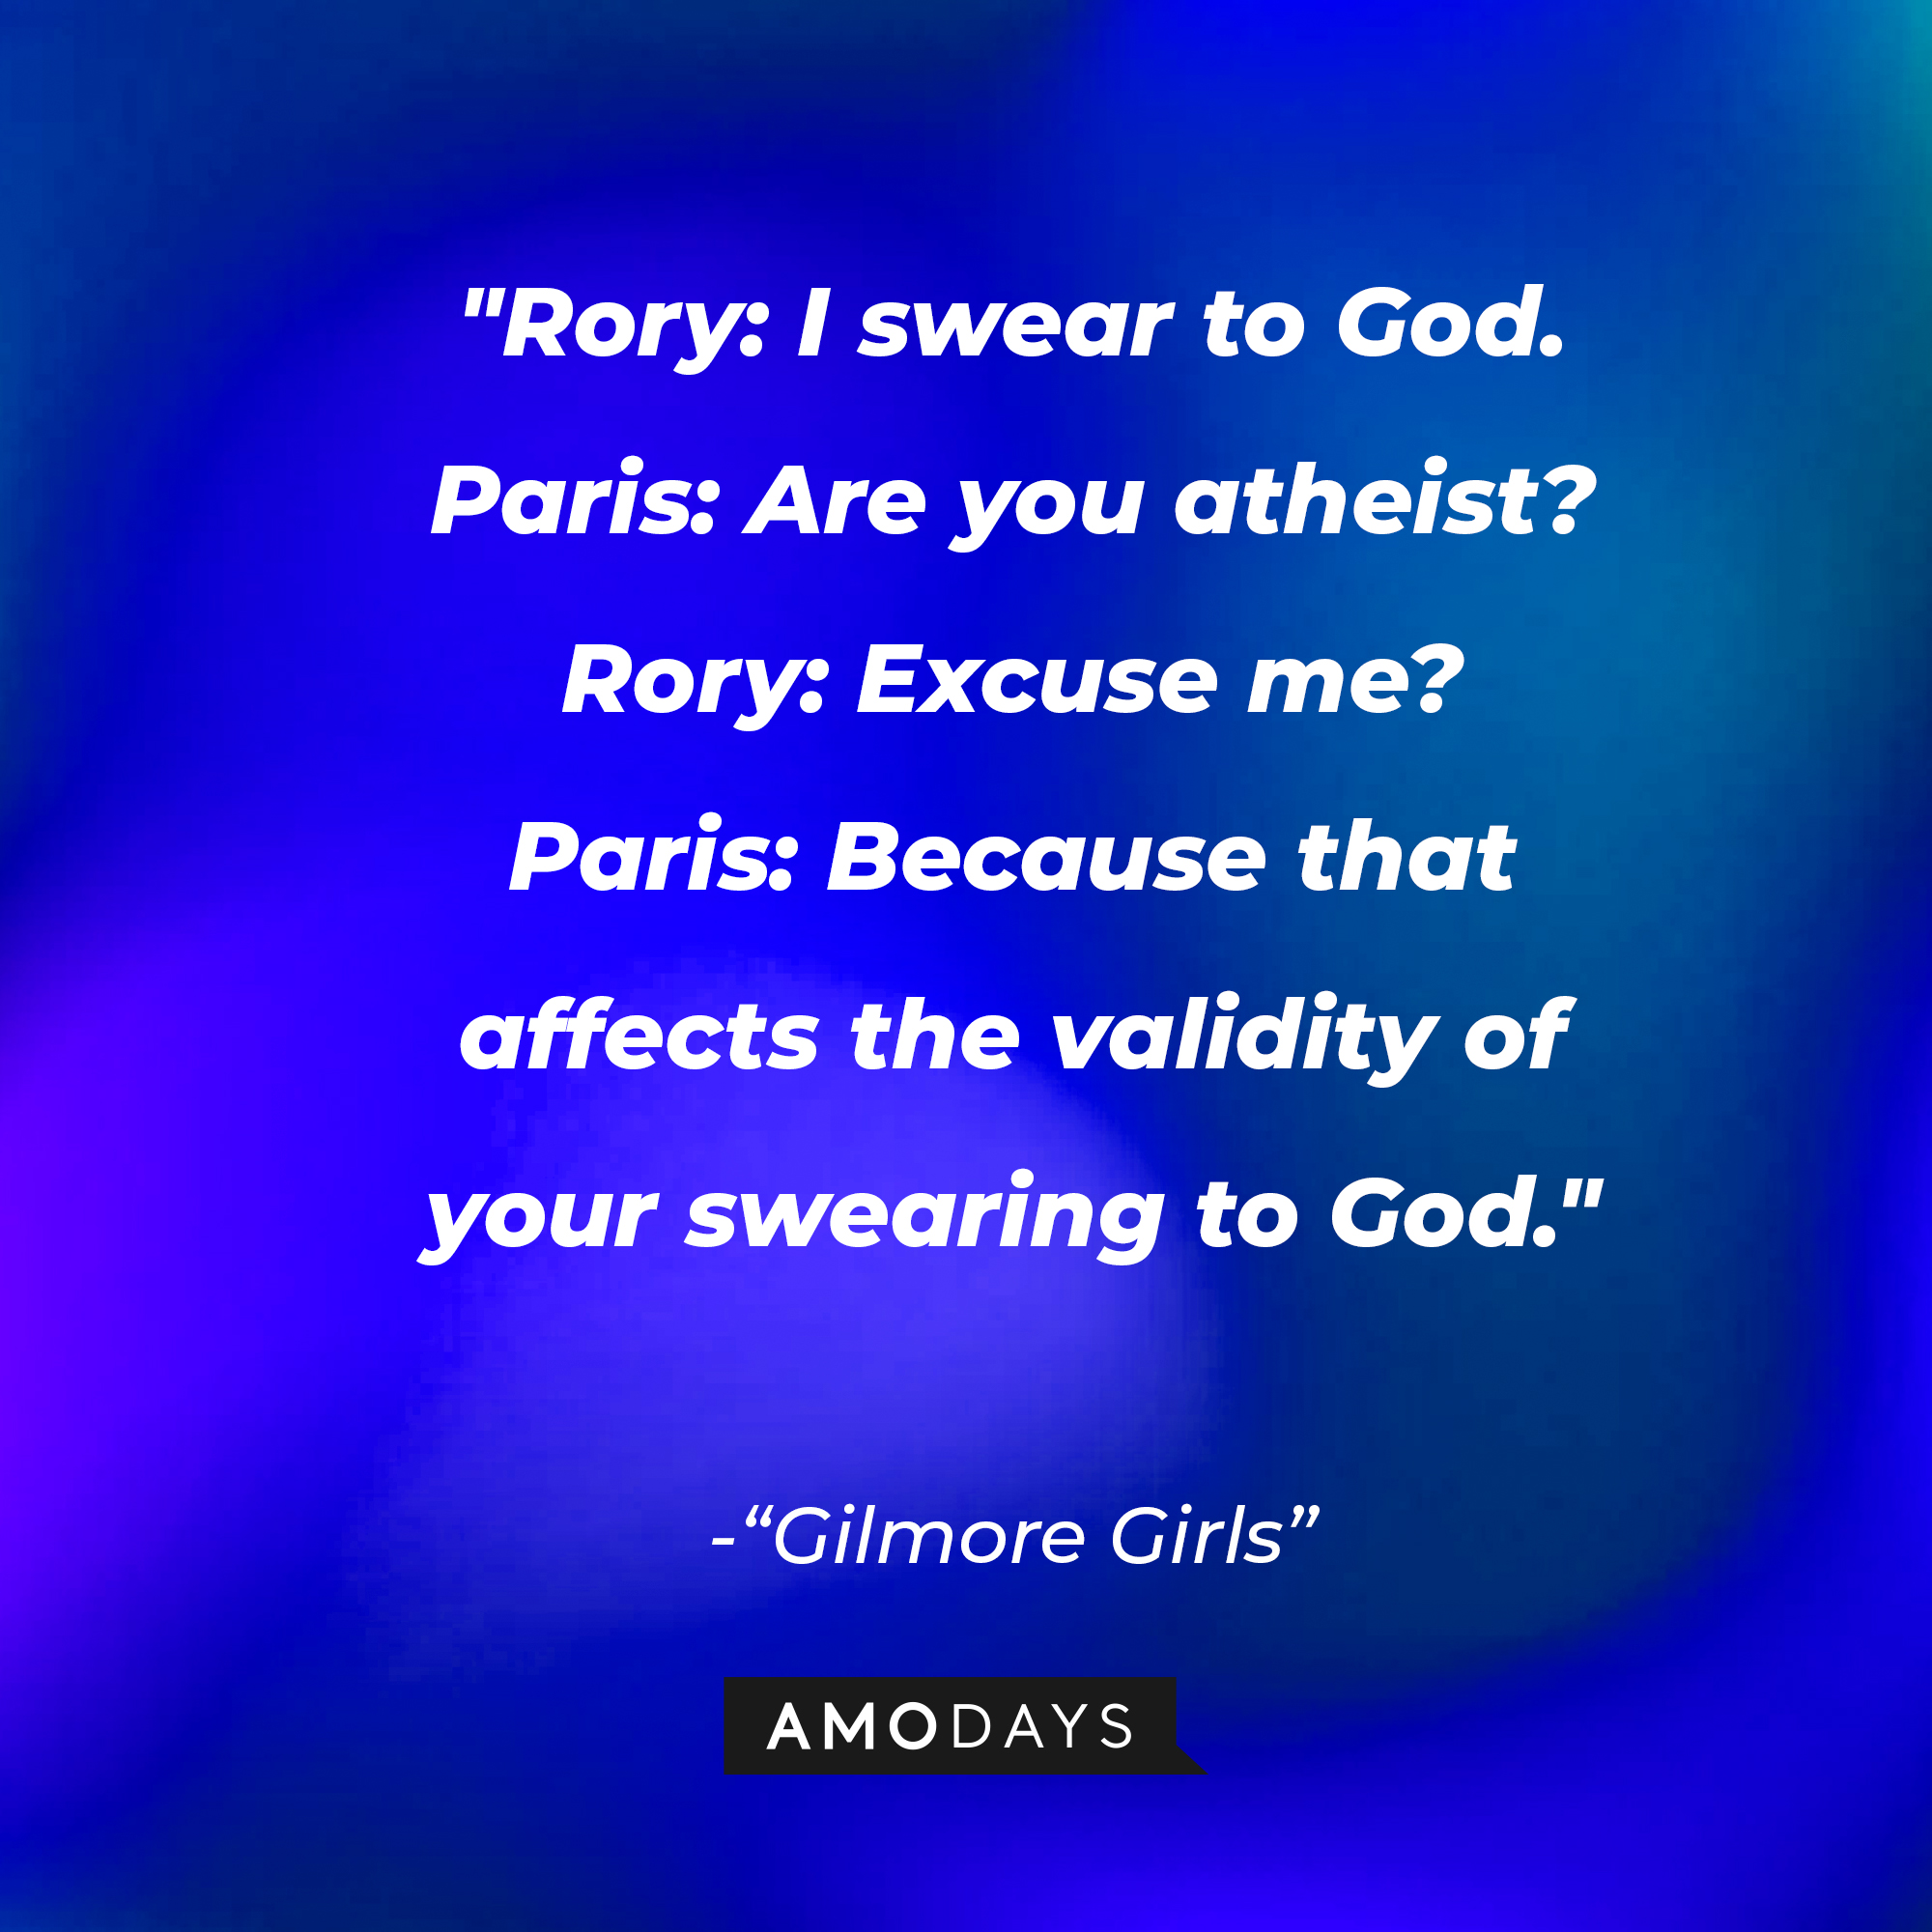 Quote from "Gilmore Girls": “Rory: I swear to God. Paris: Are you atheist? Rory: Excuse me? Paris: Because that affects the validity of your swearing to God.” | Source: AmoDays